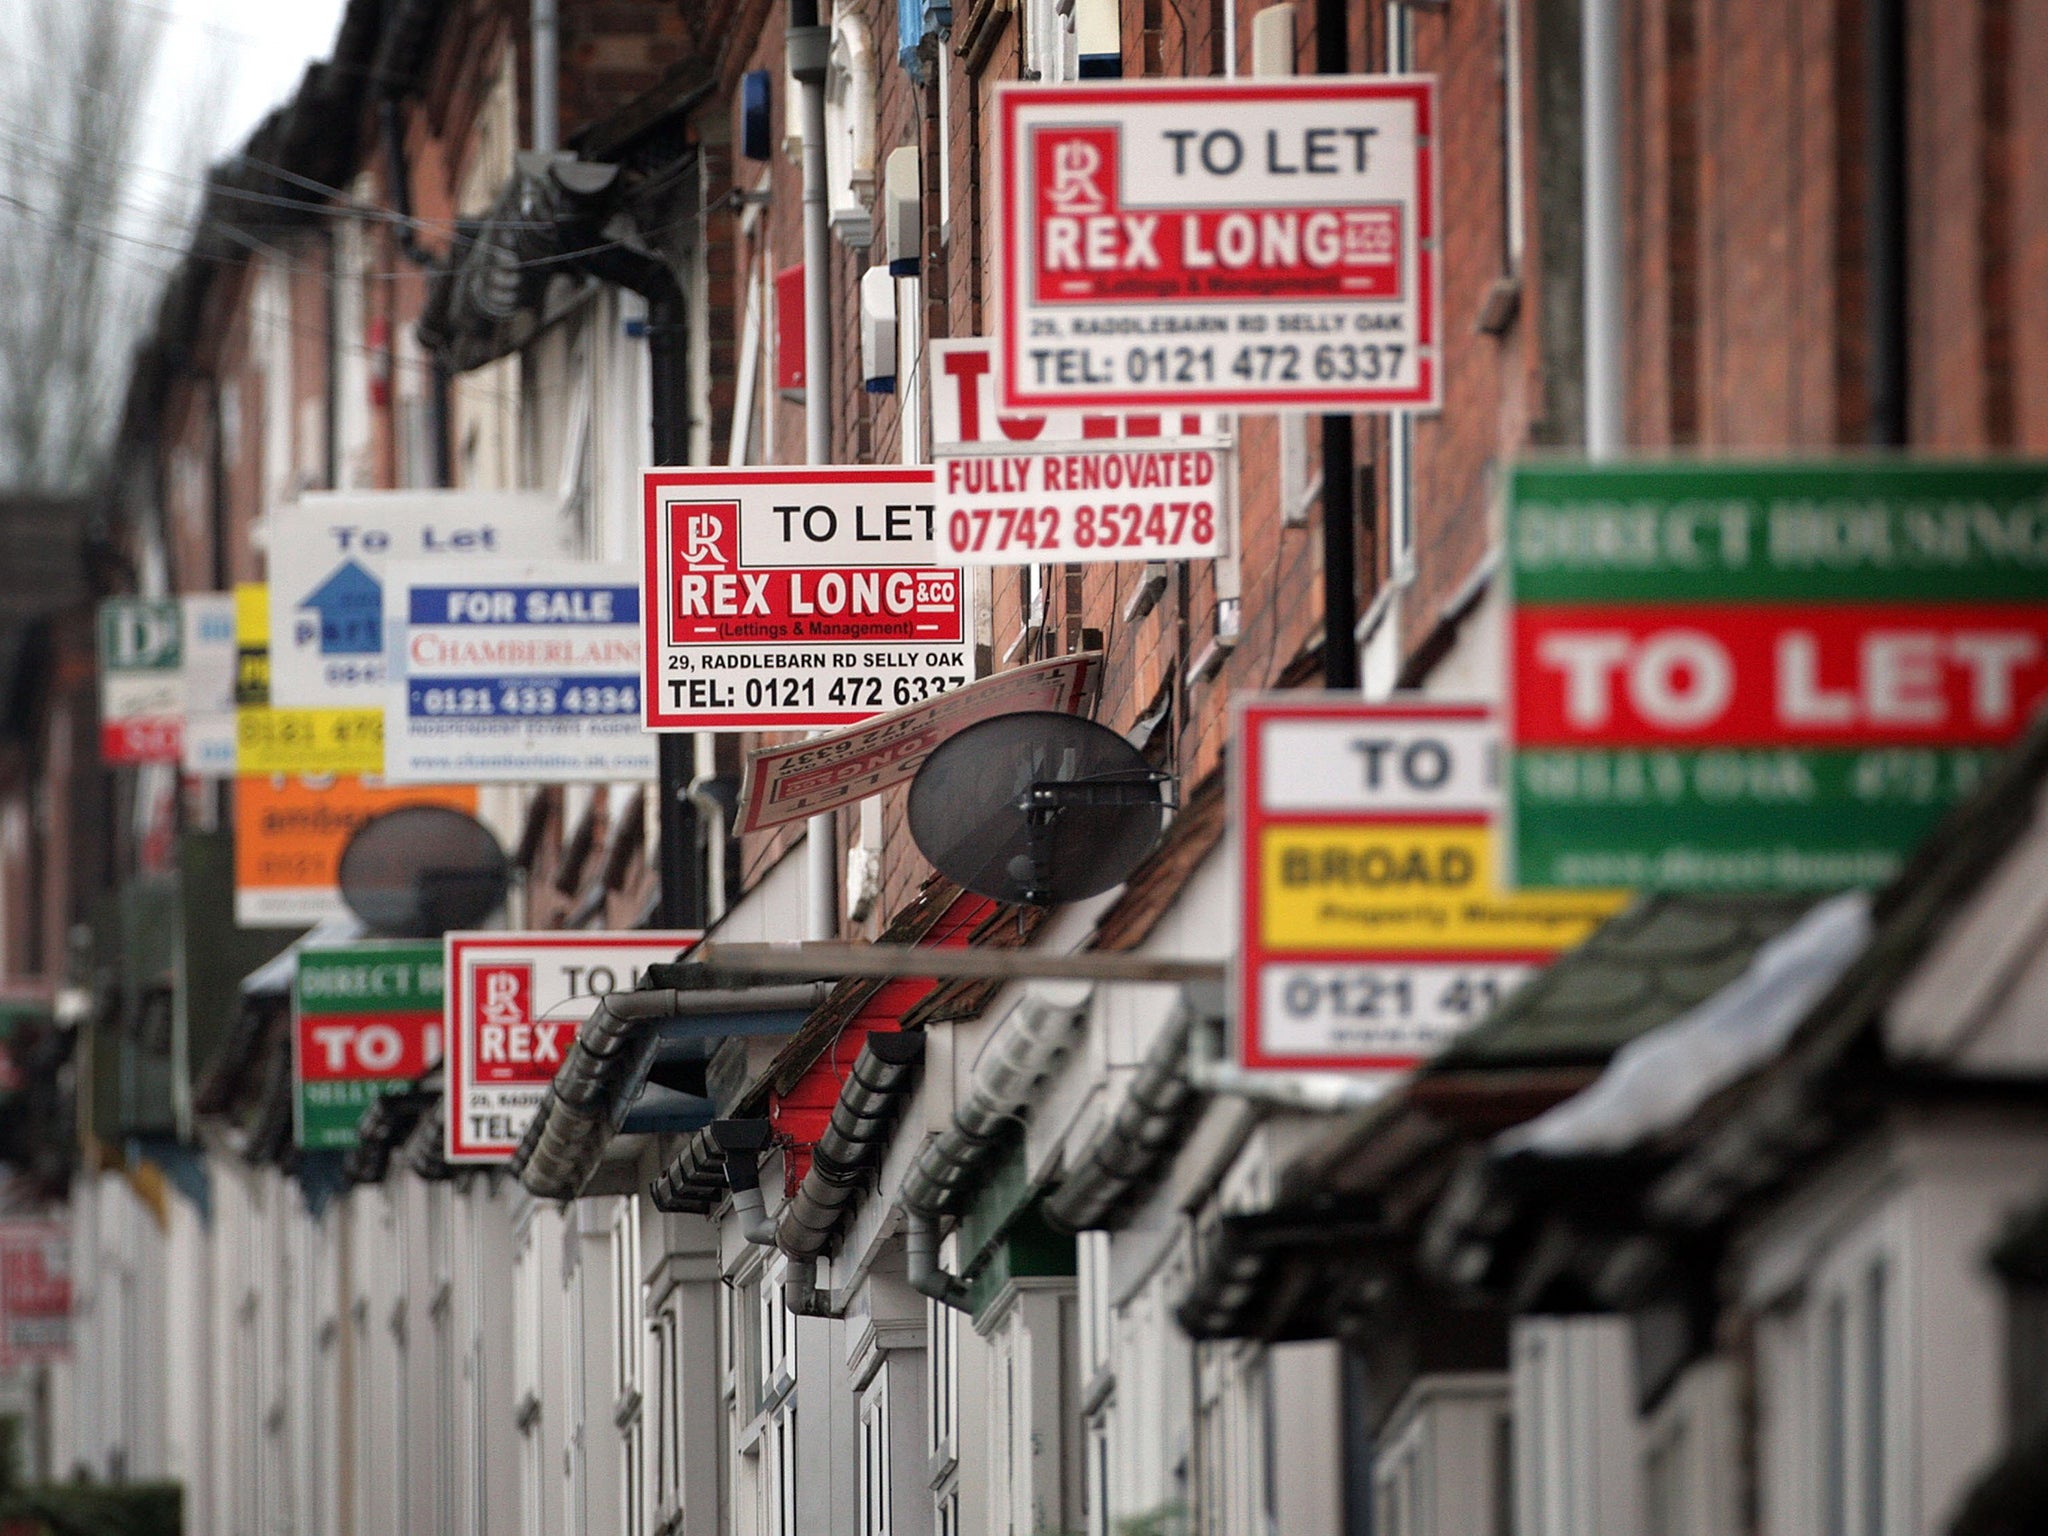 Average monthly rent charges in London are reaching £1,160